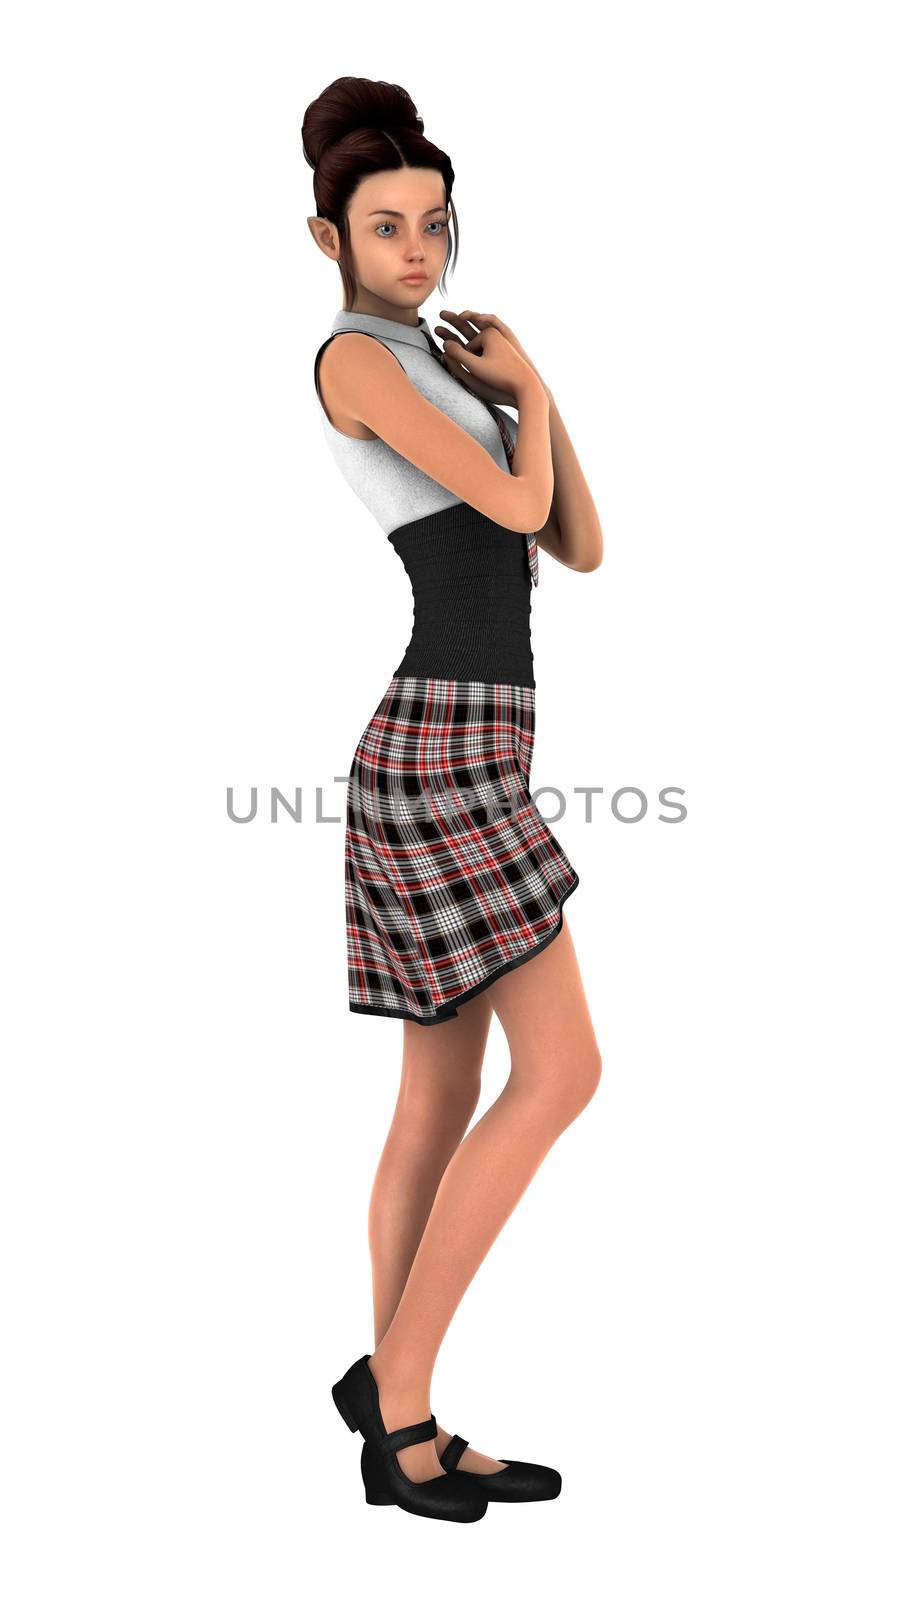 3D digital render of a teenager schoolgirl isolated on white background